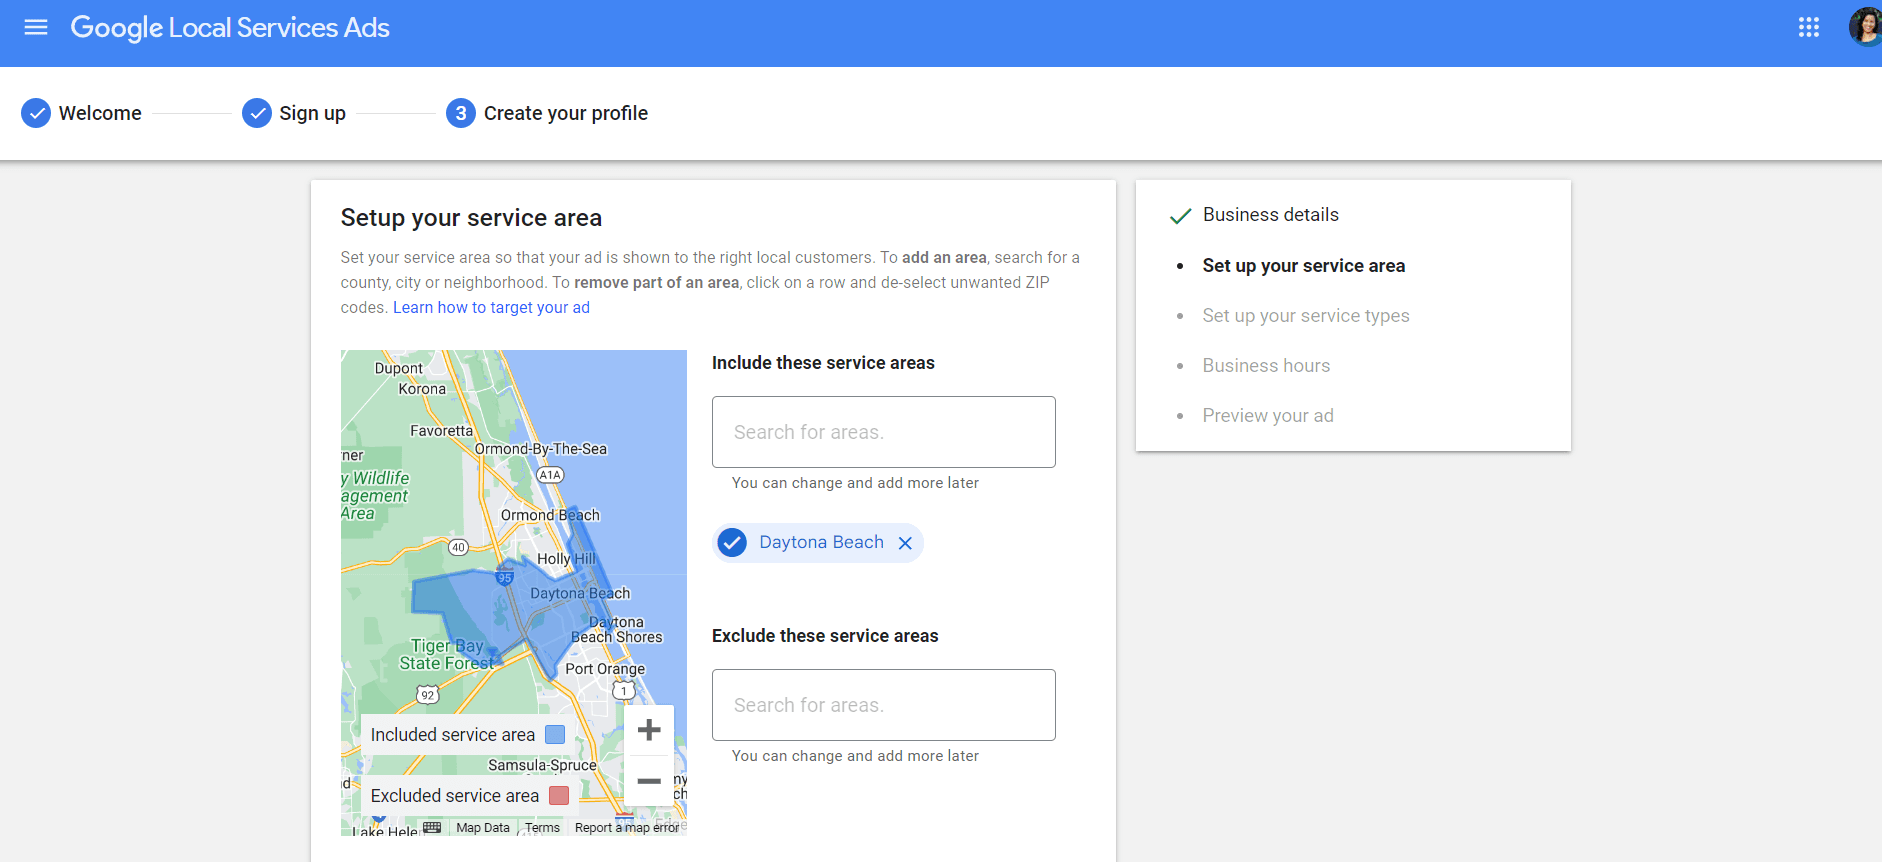 Google Local Services Ads - Geographic Region